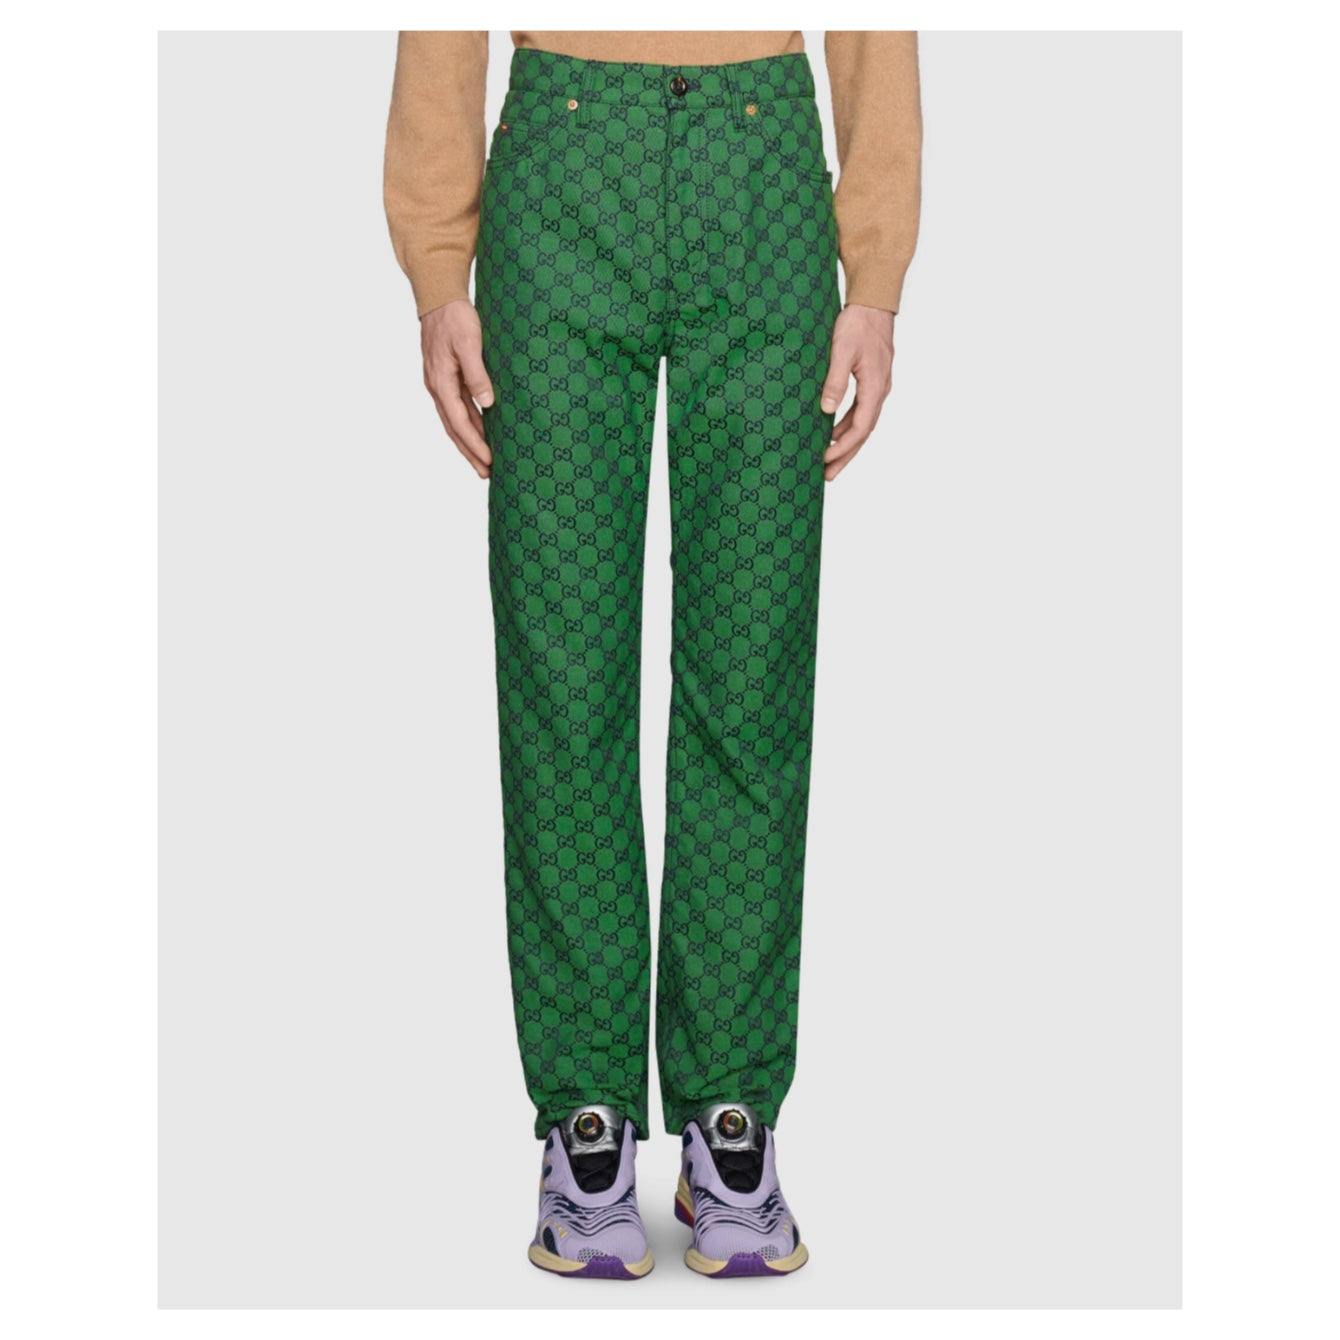 respektfuld laser præambel Gucci Canvas Trousers in Green and Blue – Ateliers Verts